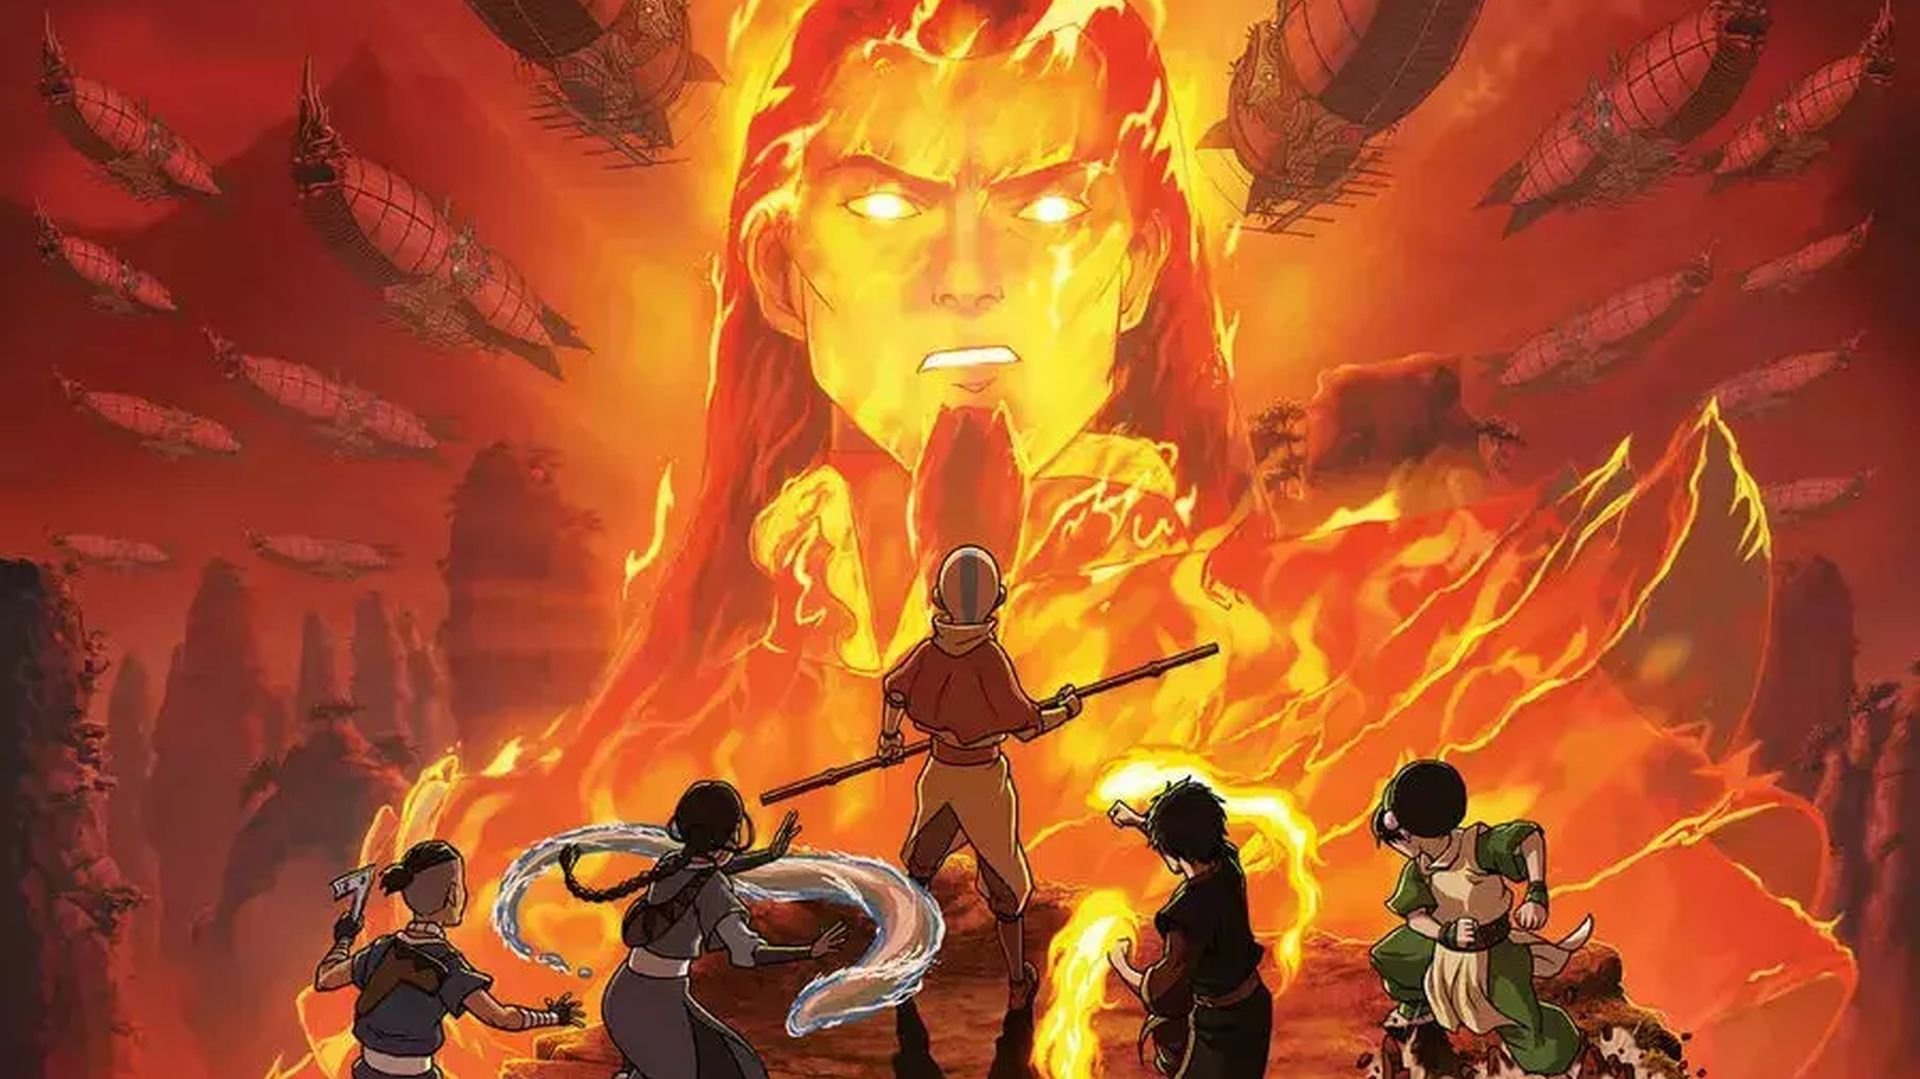 The gaang in Fire Nation disguise  Avatar the last airbender art Avatar  airbender Avatar the last airbender